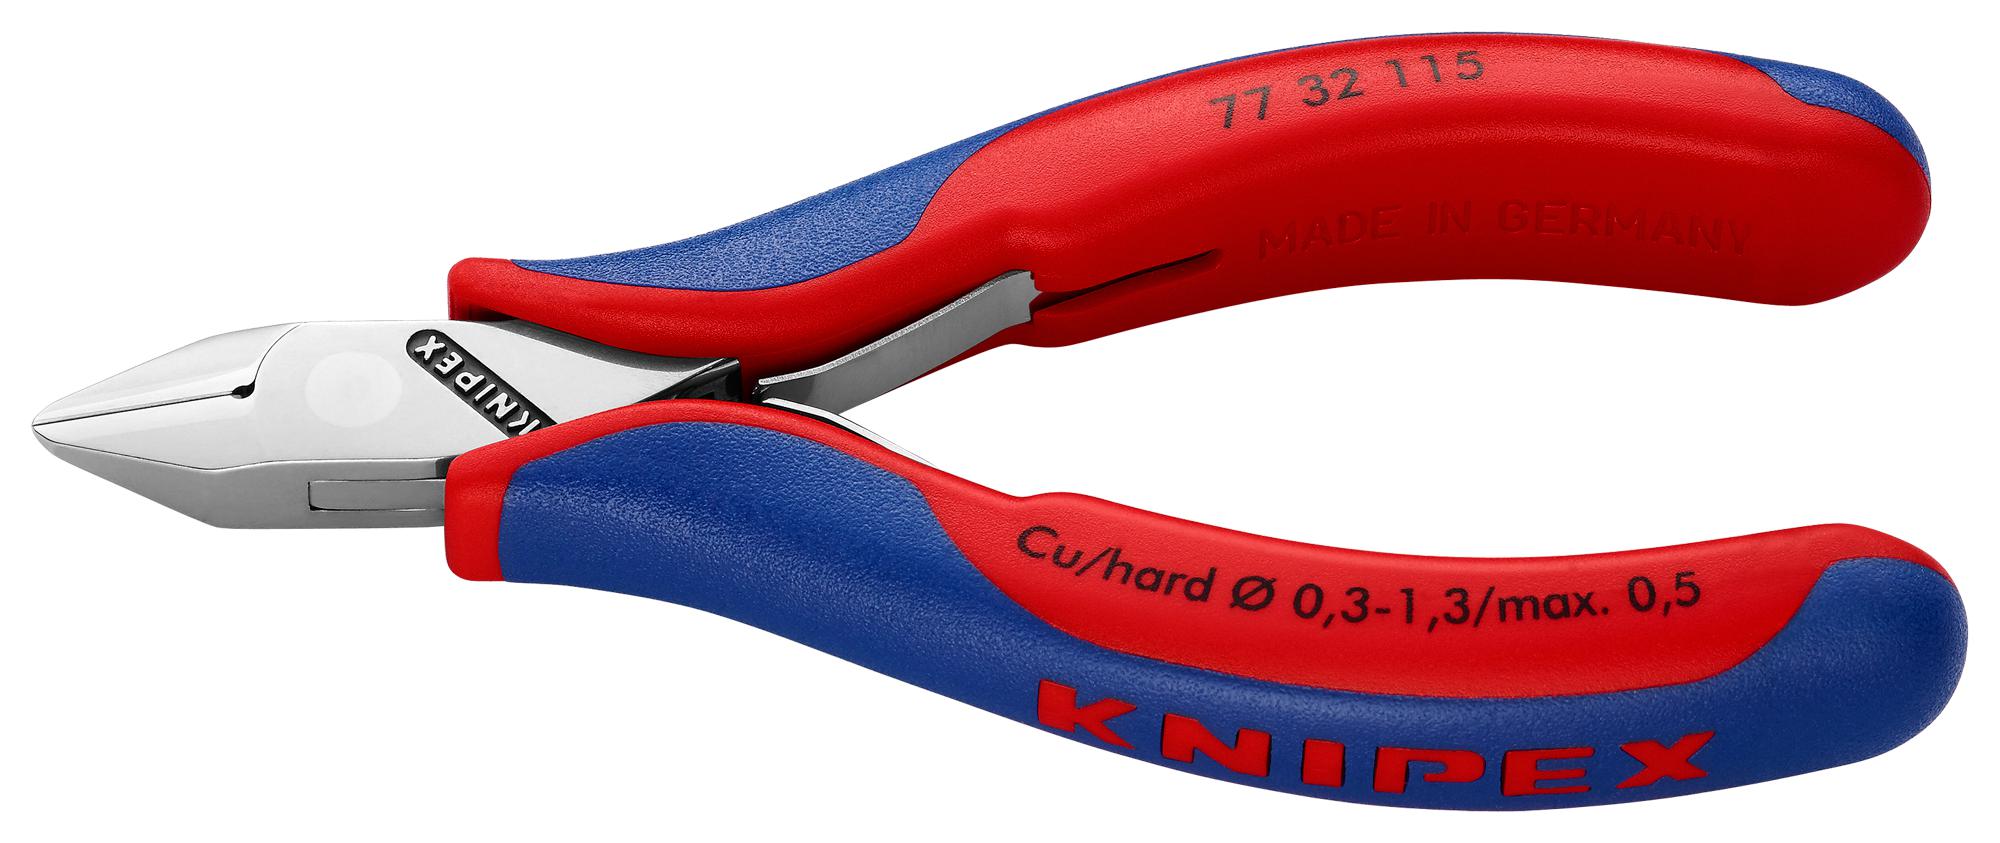 7732115 CUTTER, RED HANDLES KNIPEX